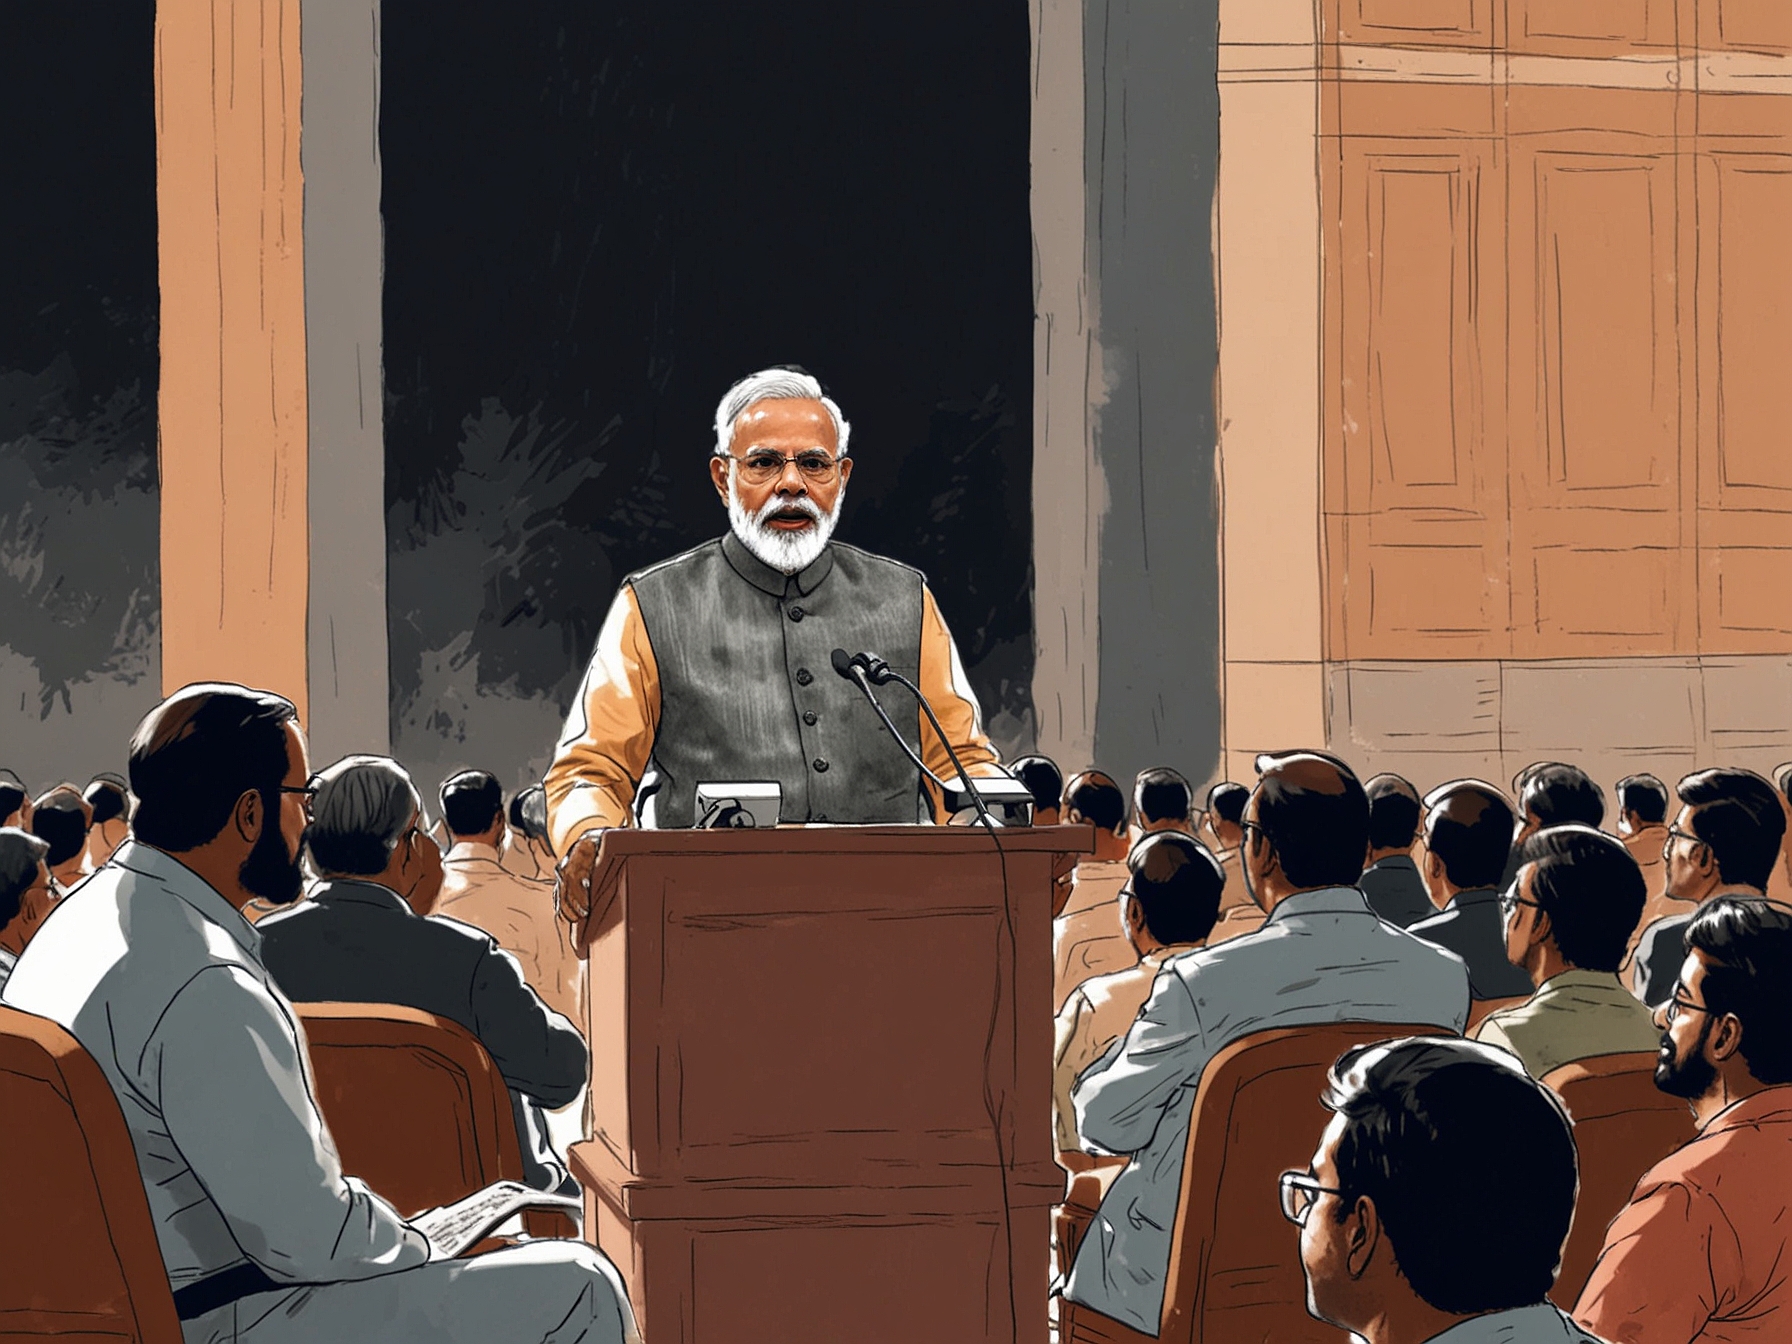 An illustration showing Prime Minister Narendra Modi addressing a gathering, emphasizing policy reforms like 'Make in India' and 'Digital India' that aim to boost the economy.